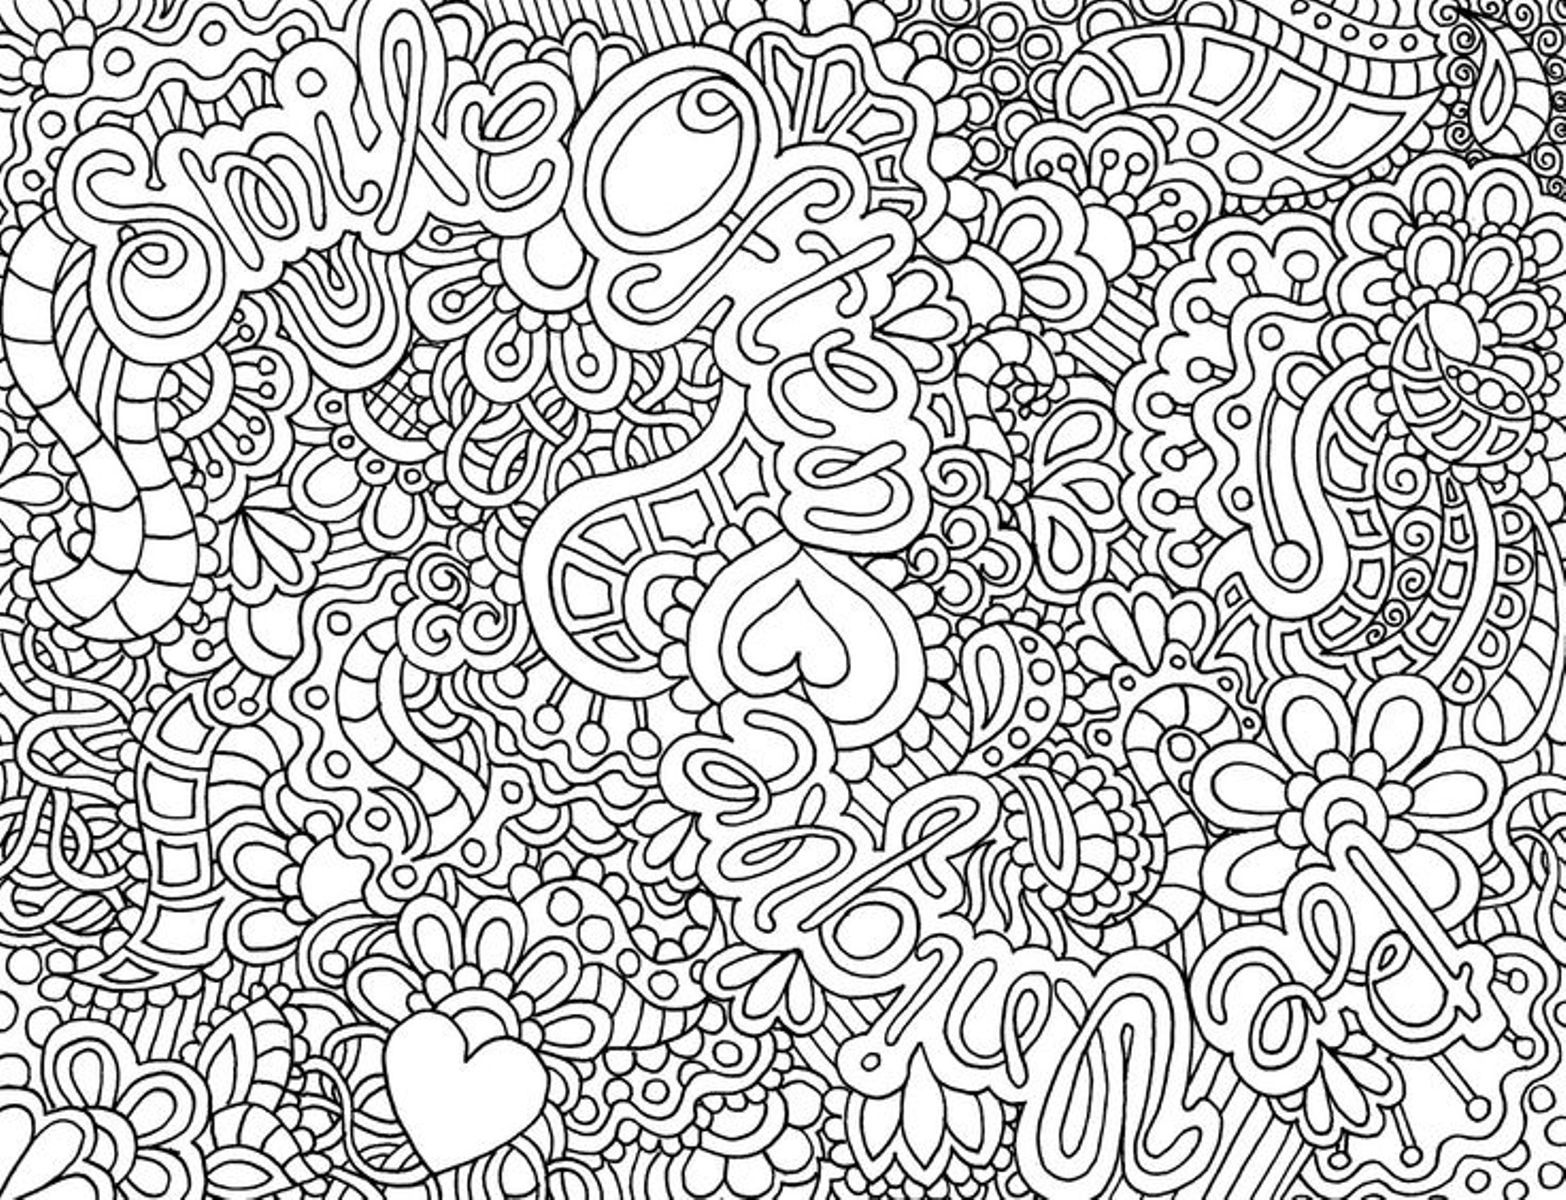 Coloring Pages for Teenagers {Free Printables}